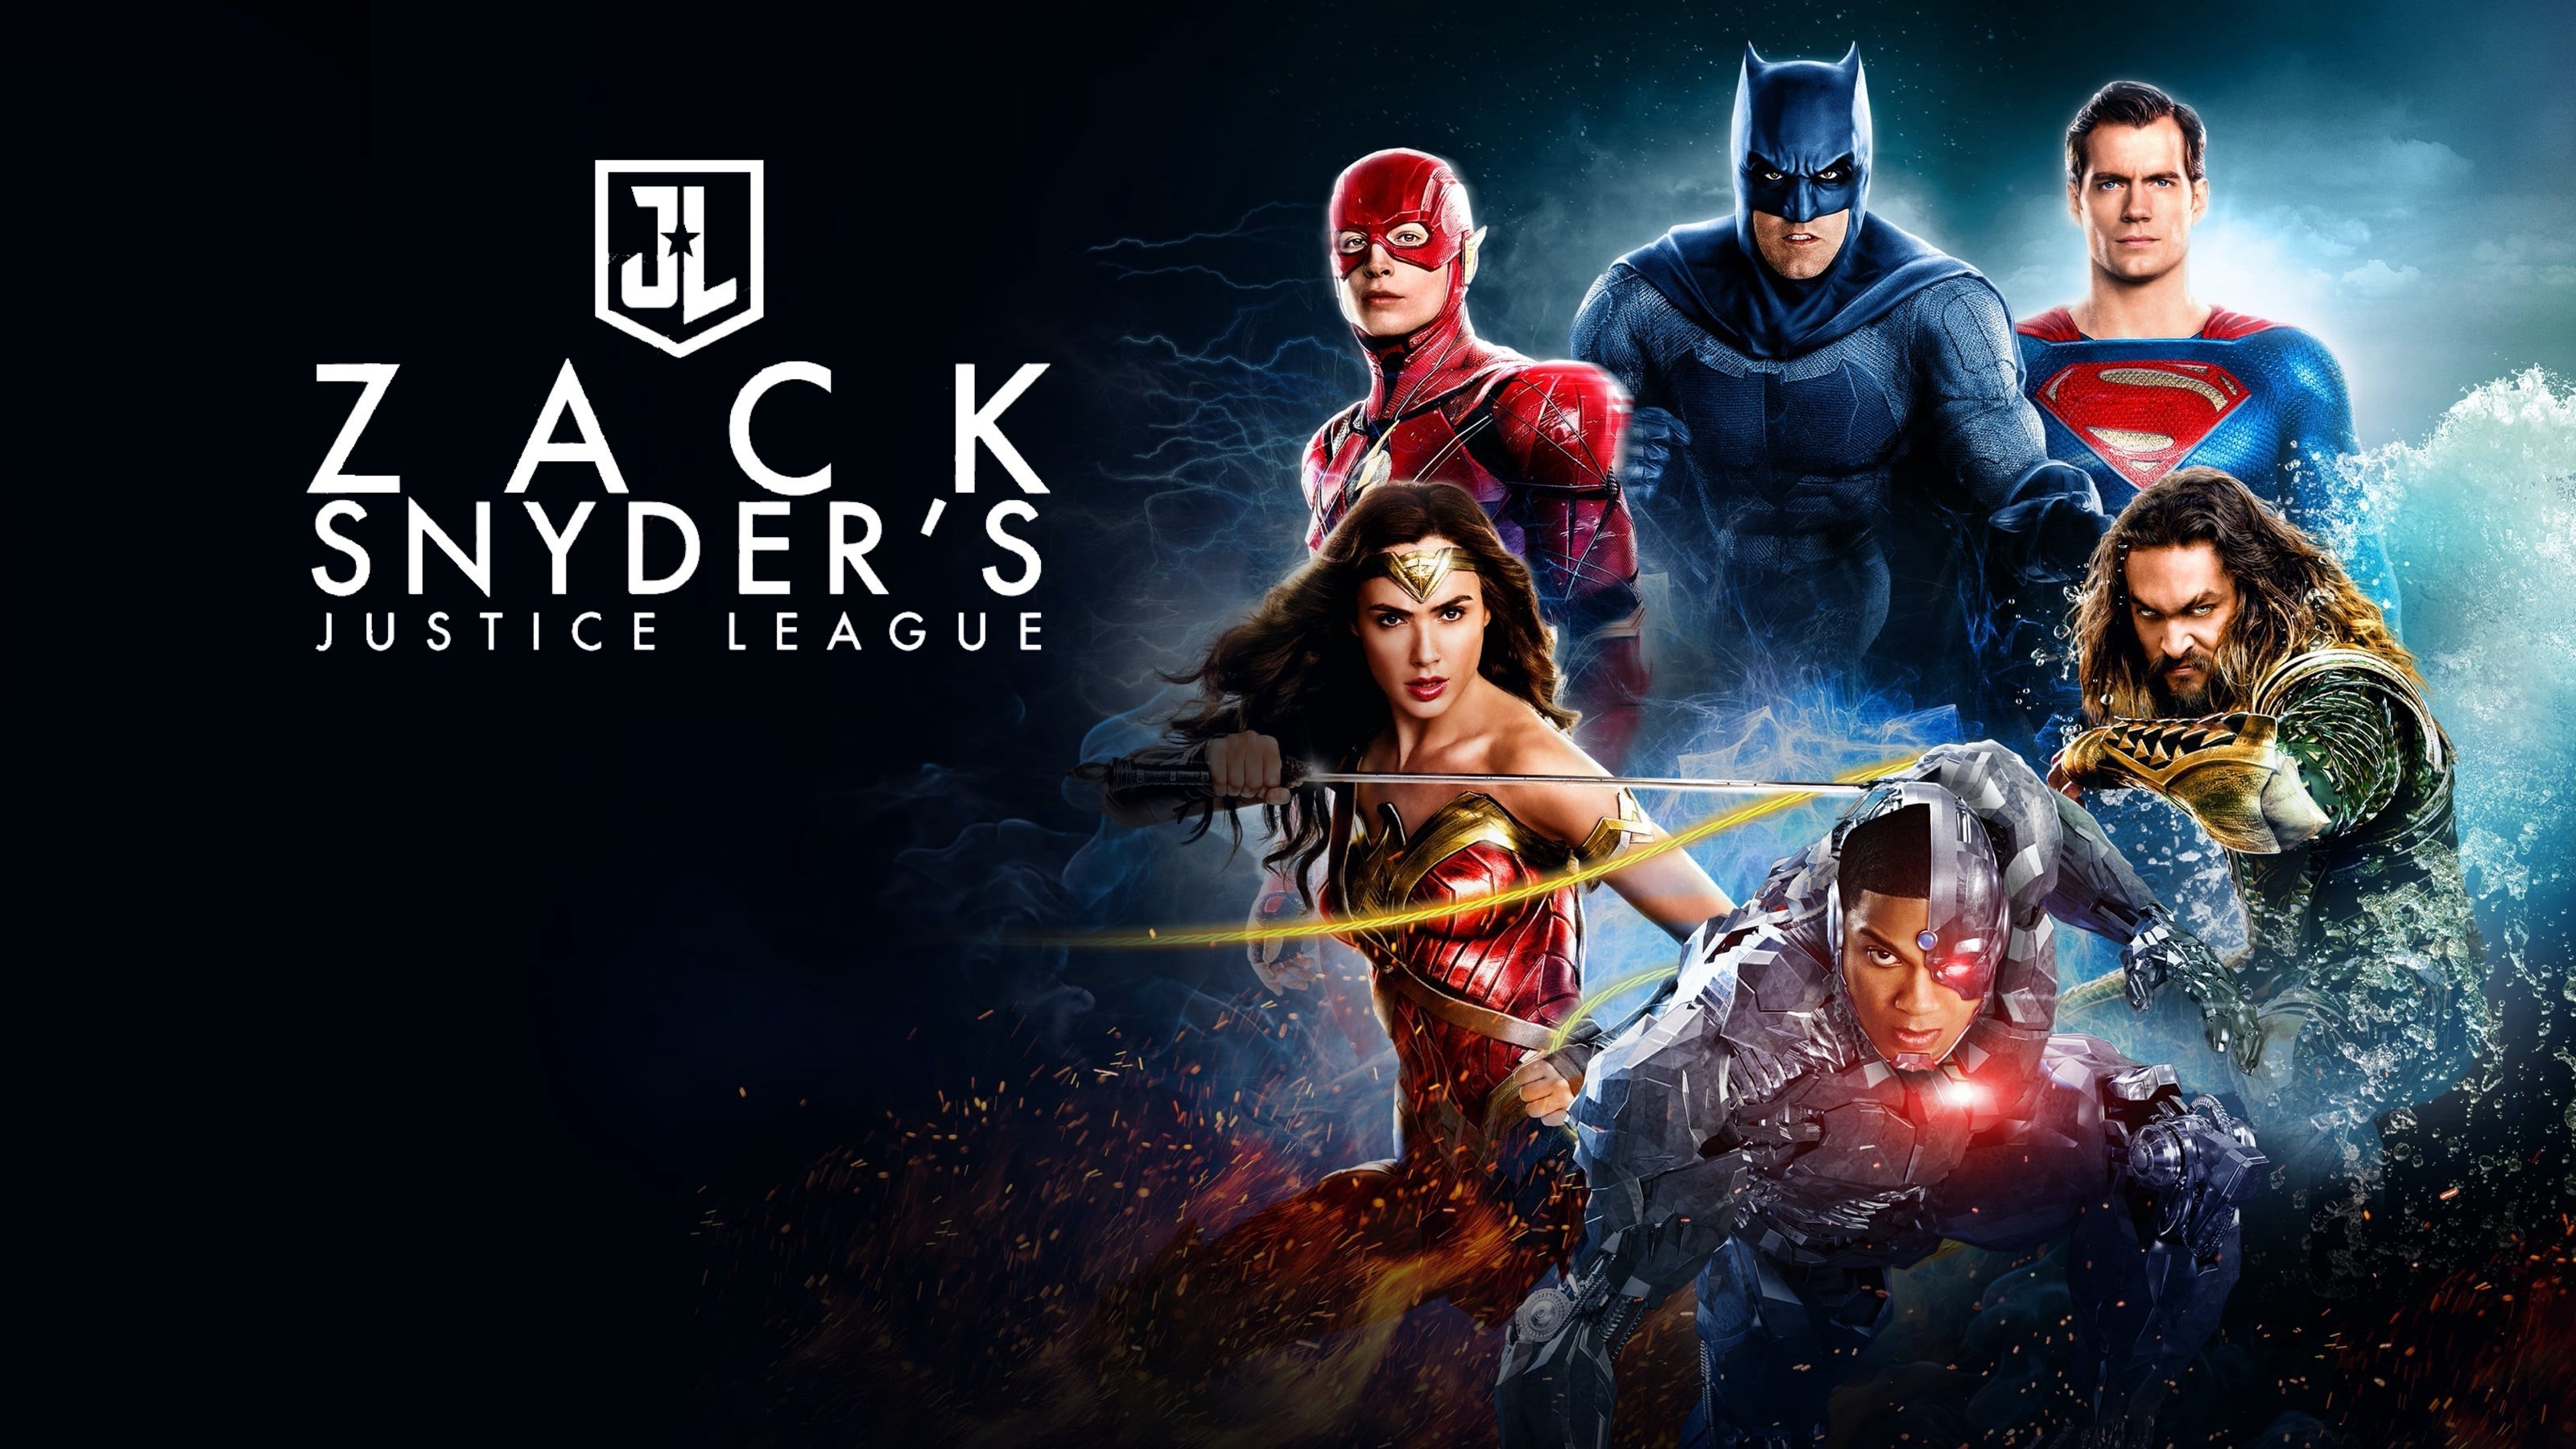 Watch Zack Snyder's Justice League Movie (Full Bilingual English - Vietnamese)